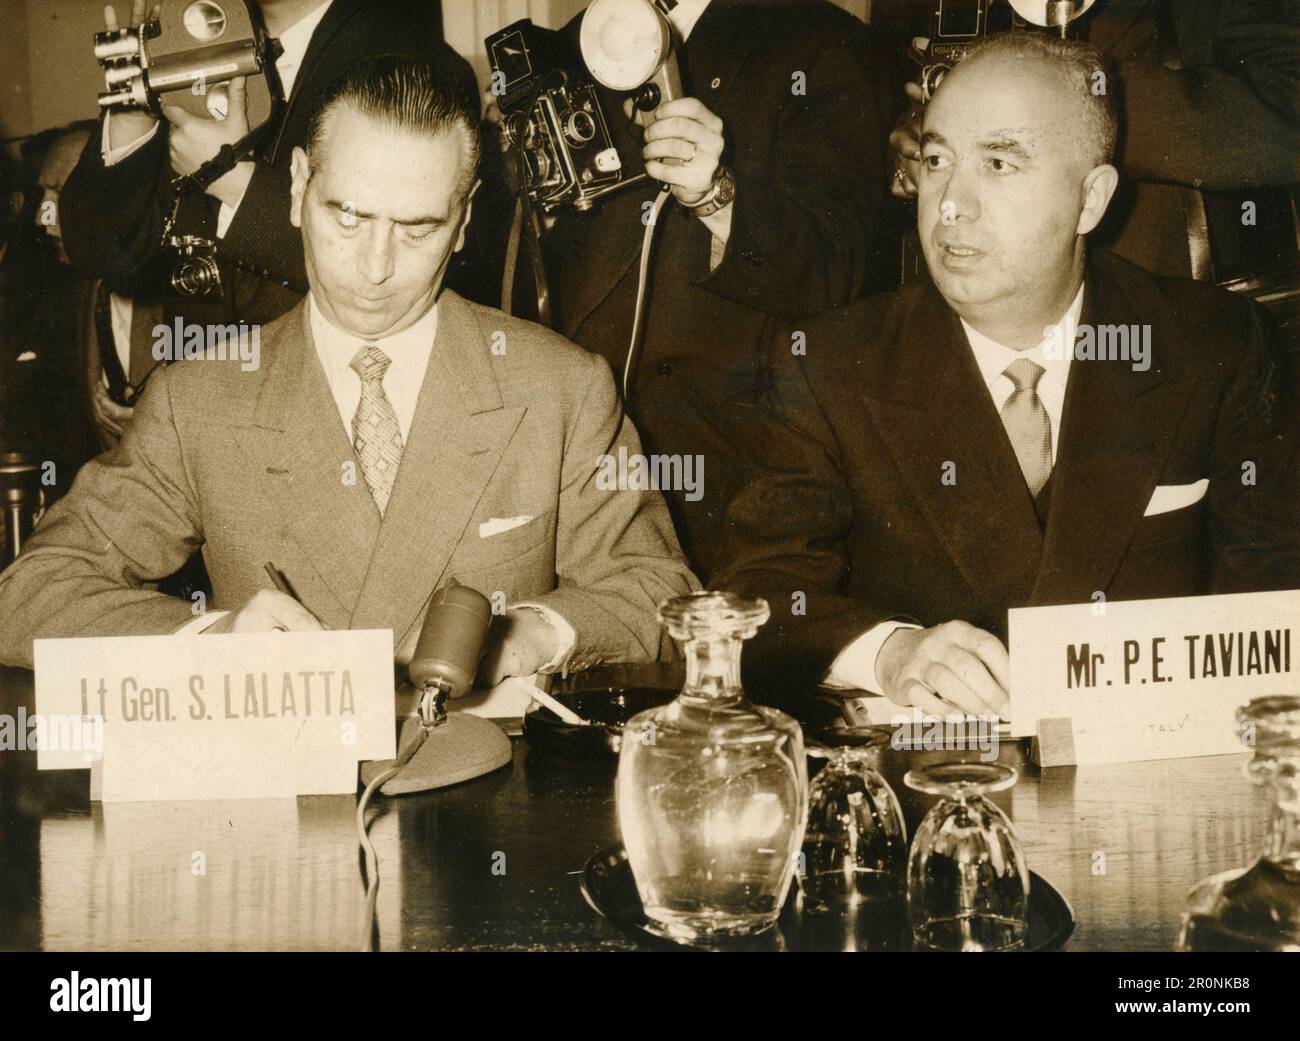 Italian Lt. Gen. S. Lalatta and political leader and economist Paolo Emilio Taviani at a press conference, Italy 1965 Stock Photo